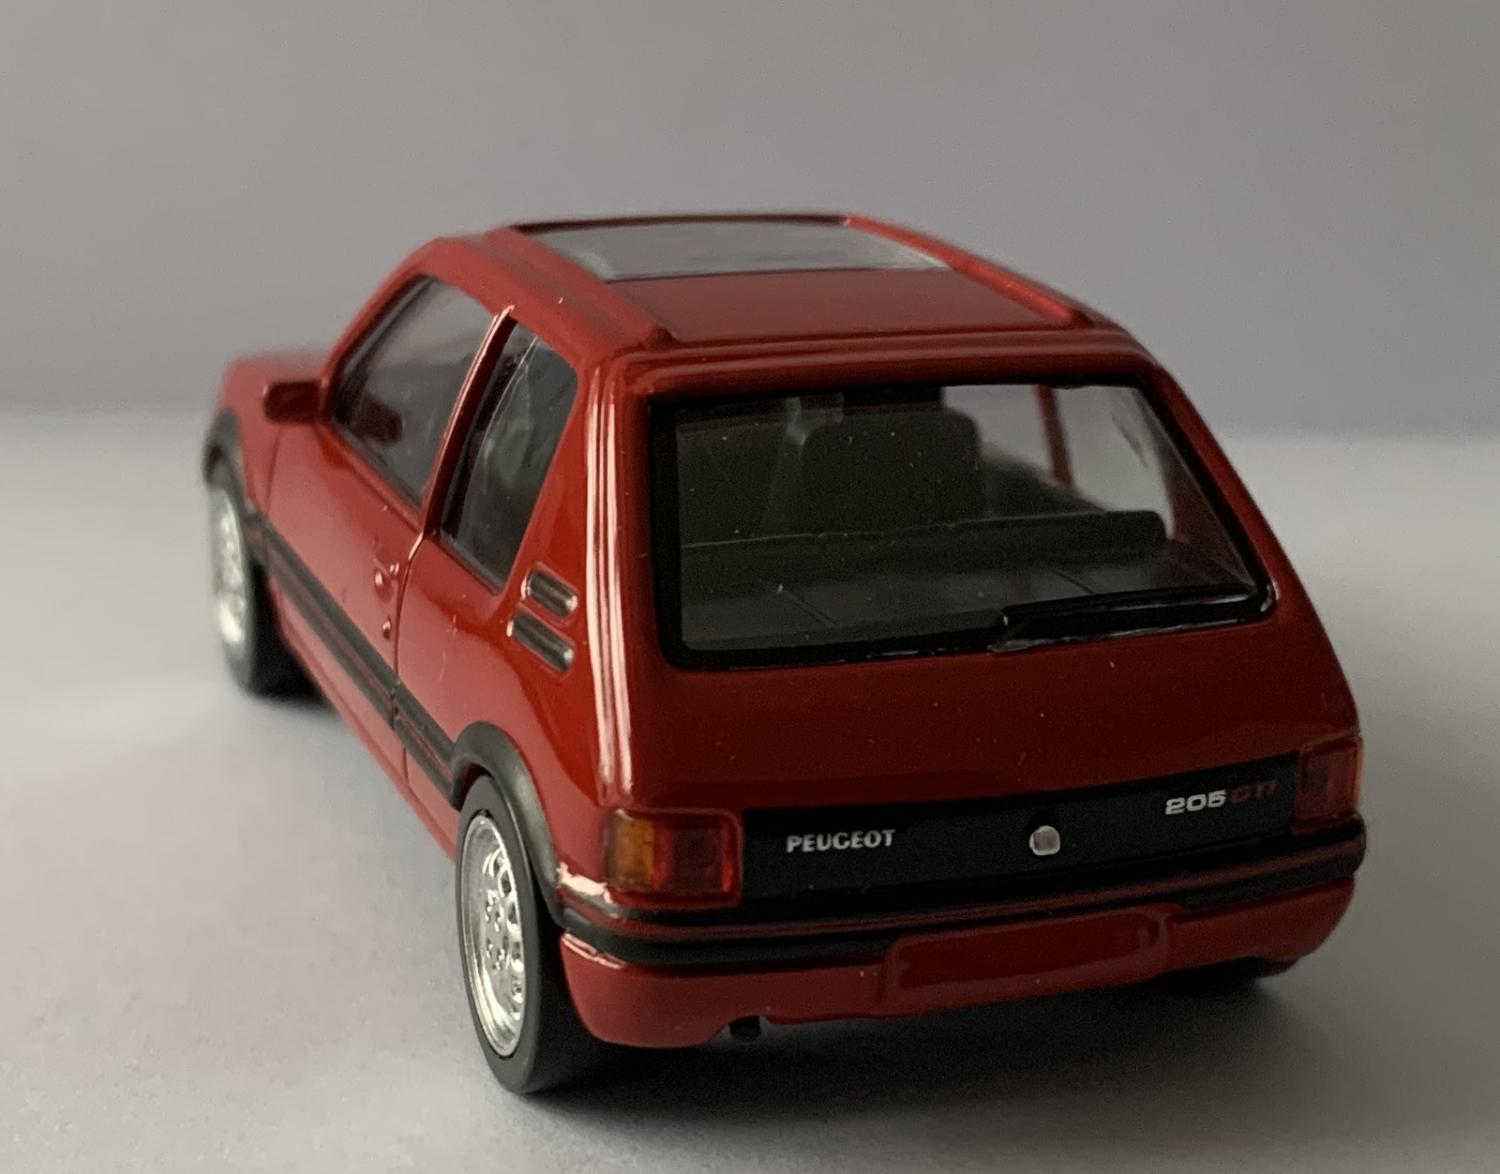 A good replica of the Peugeot 205 GTI decorated in vallelunga red with silver wheels.